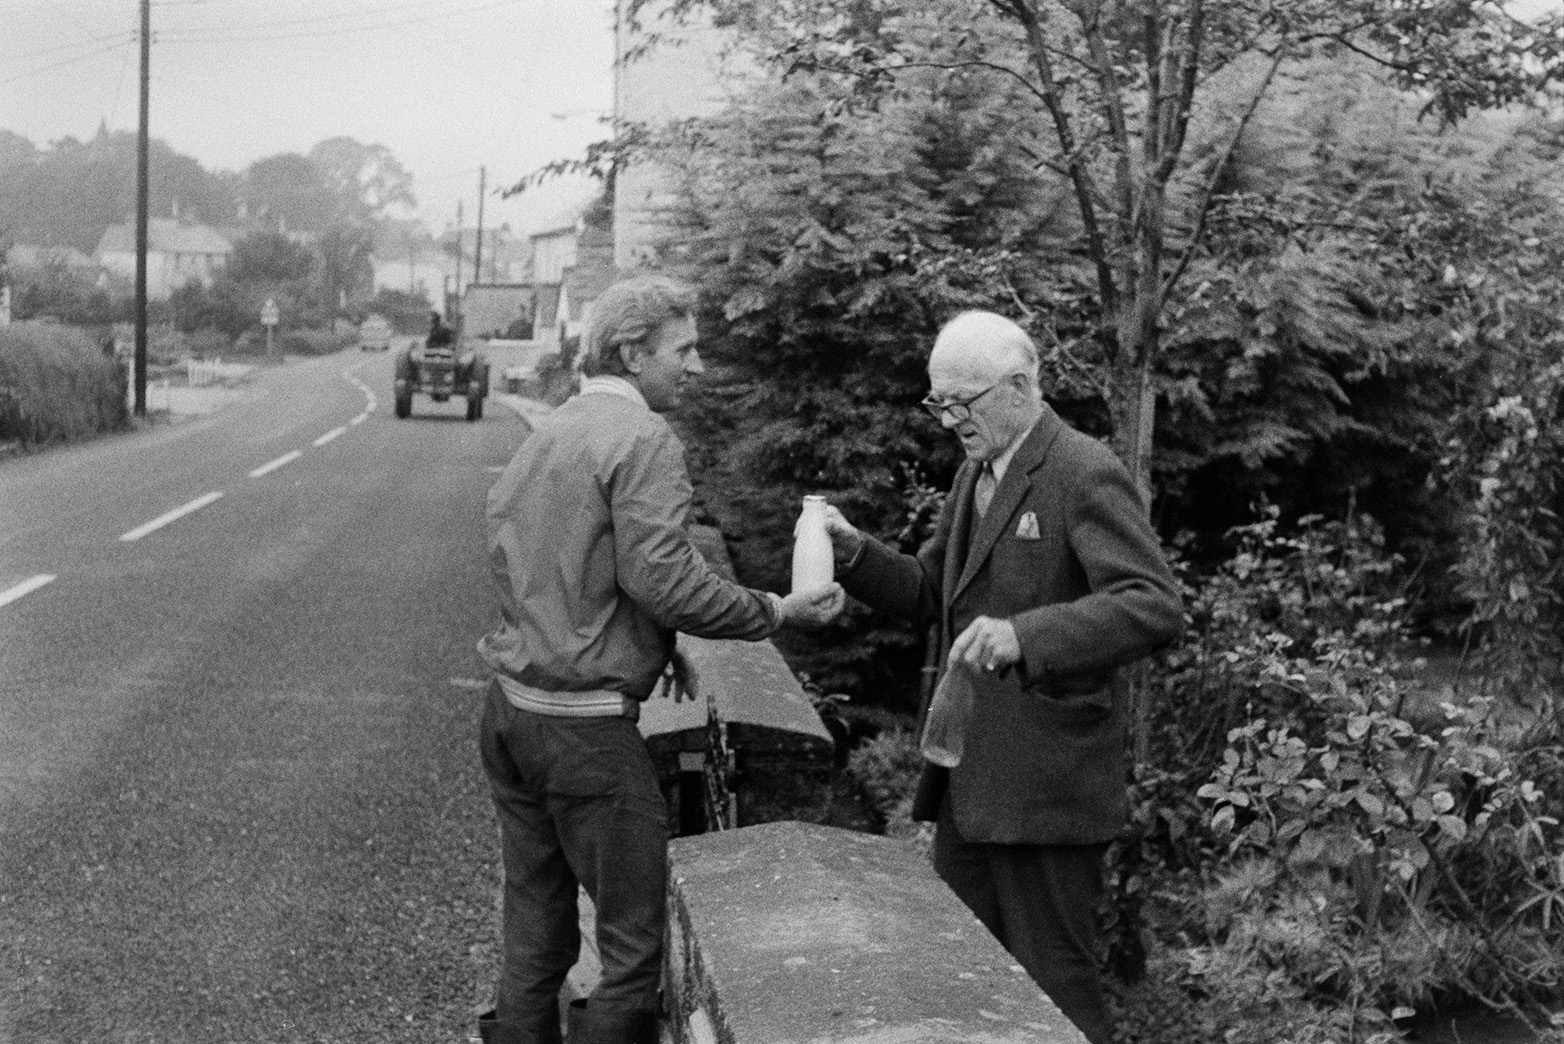 Ivor Bourne handing a milk bottle to a man, over a garden wall in Beaford. The man is returning an empty bottle to Ivor. A tractor can be seen further along the street in the background.